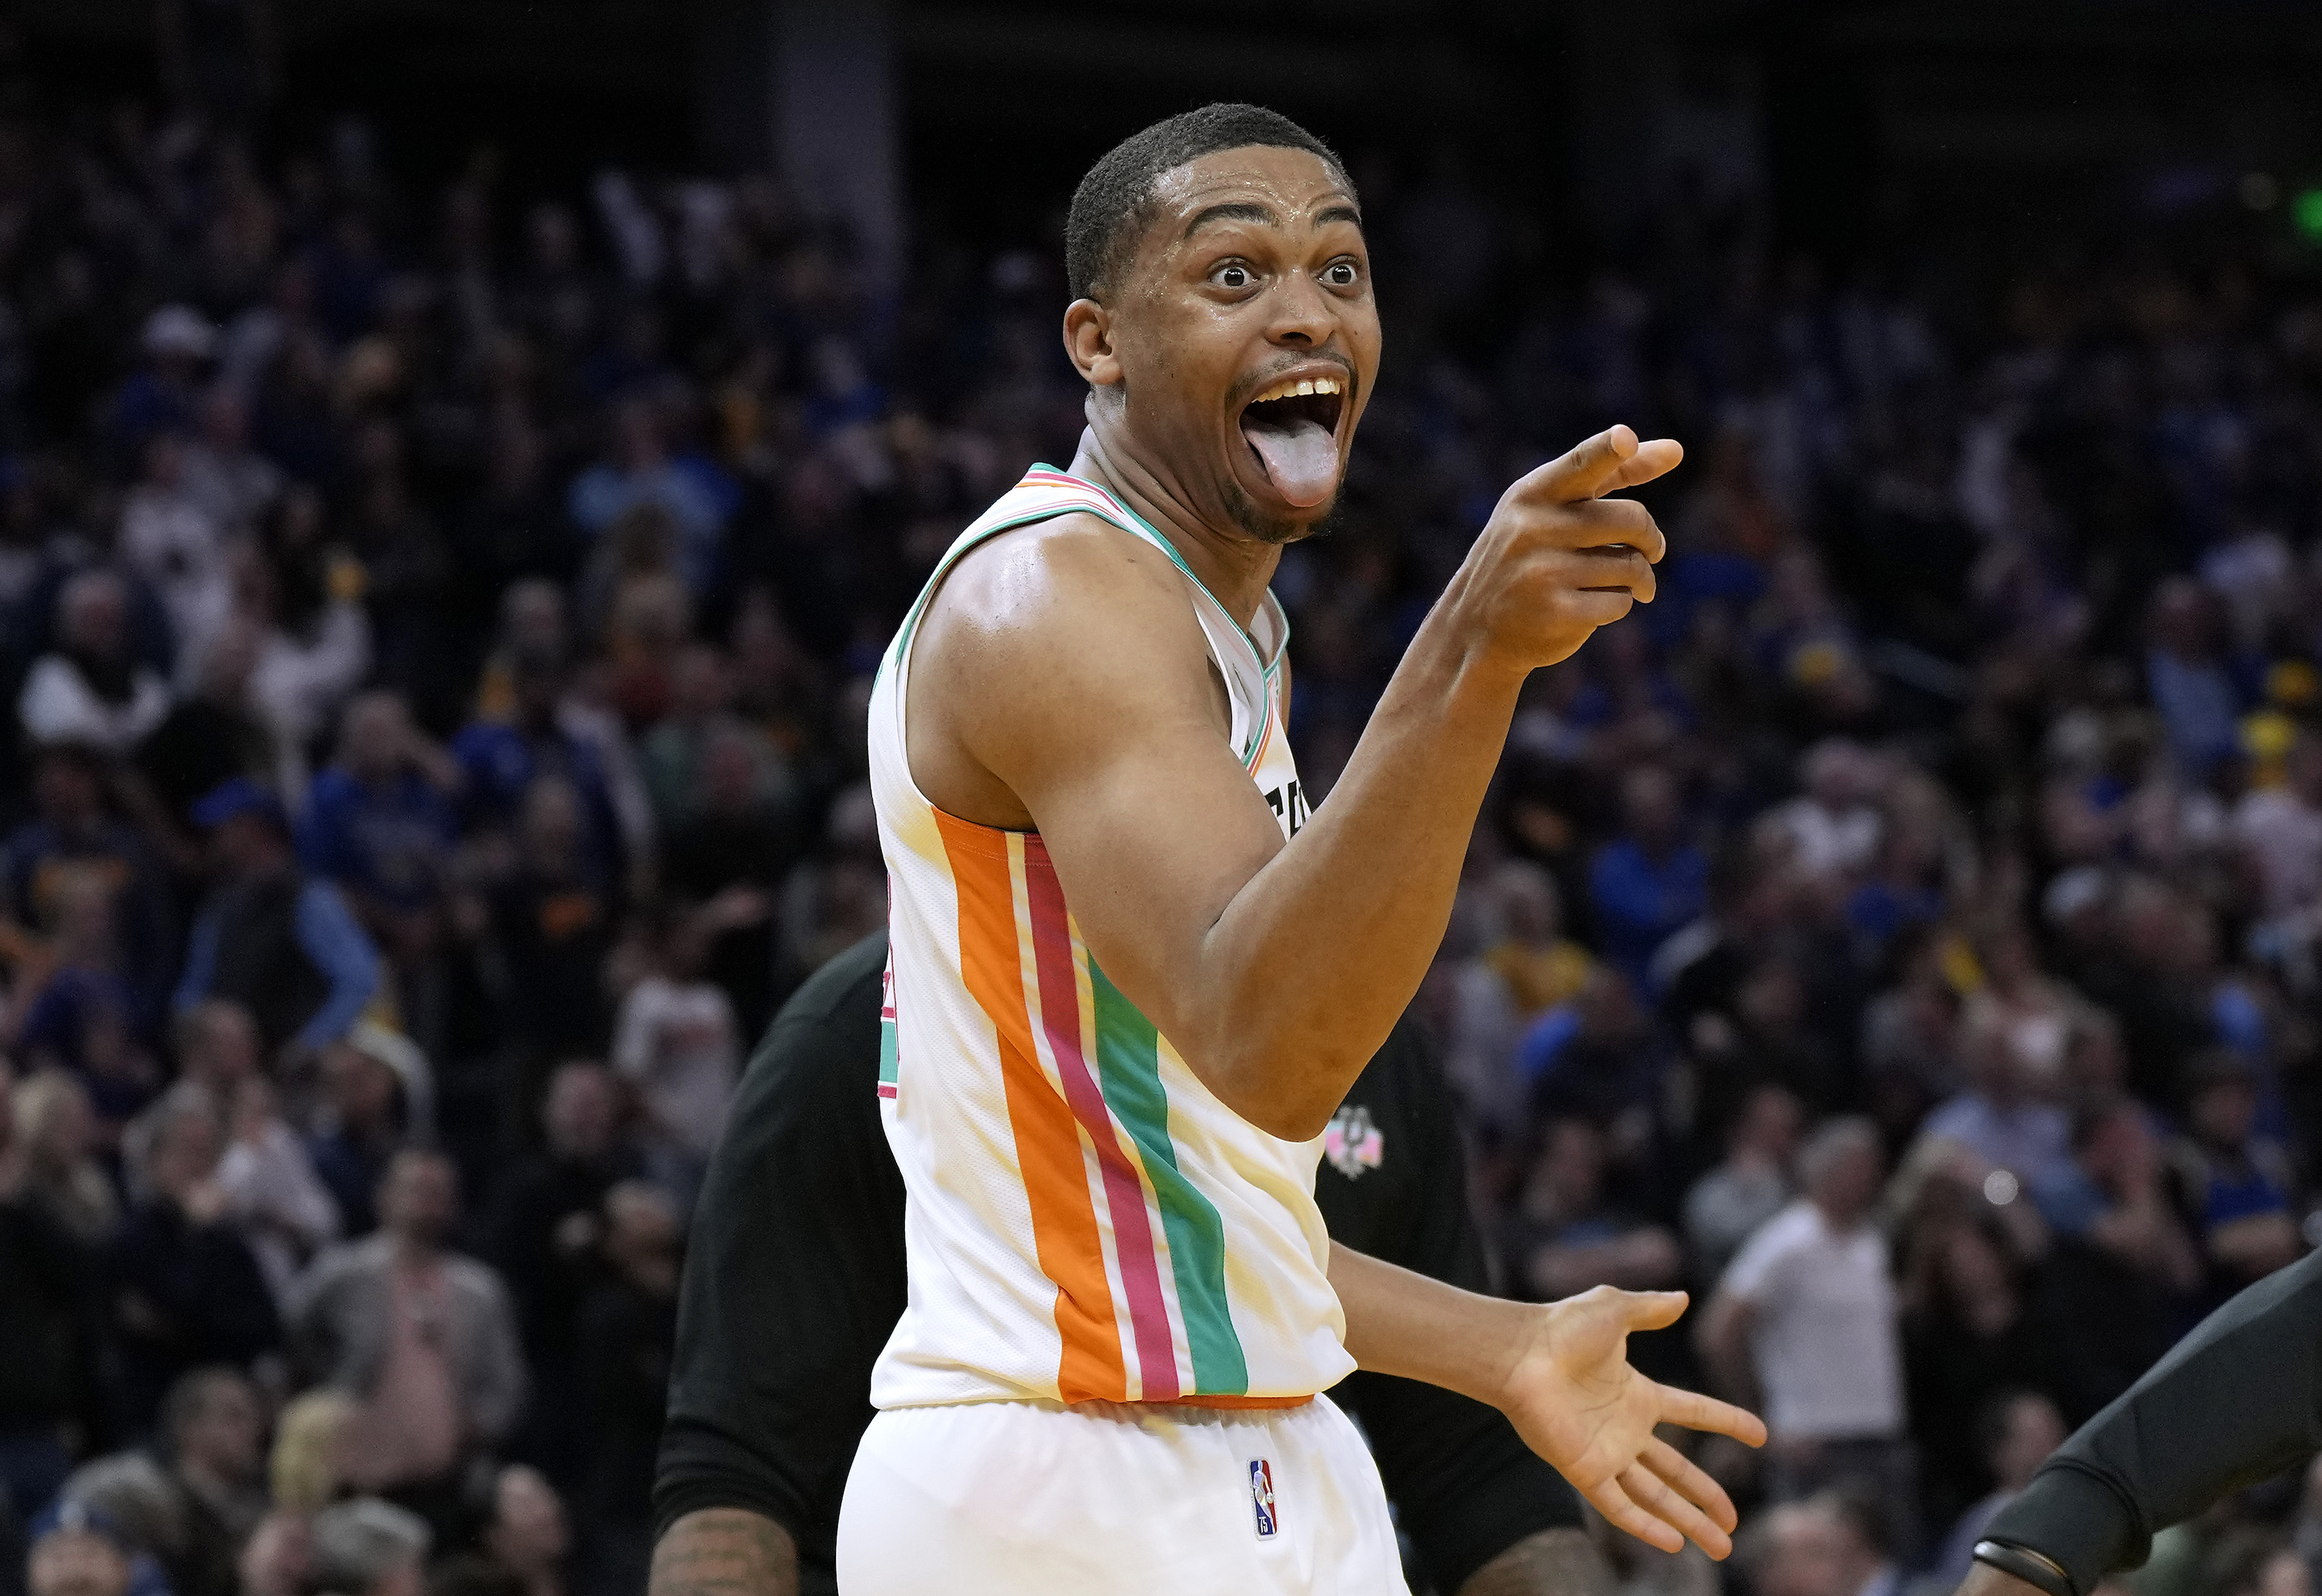 San Antonio Spurs wing Keldon Johnson celebrates during an NBA game against the Golden State Warriors in March 2022